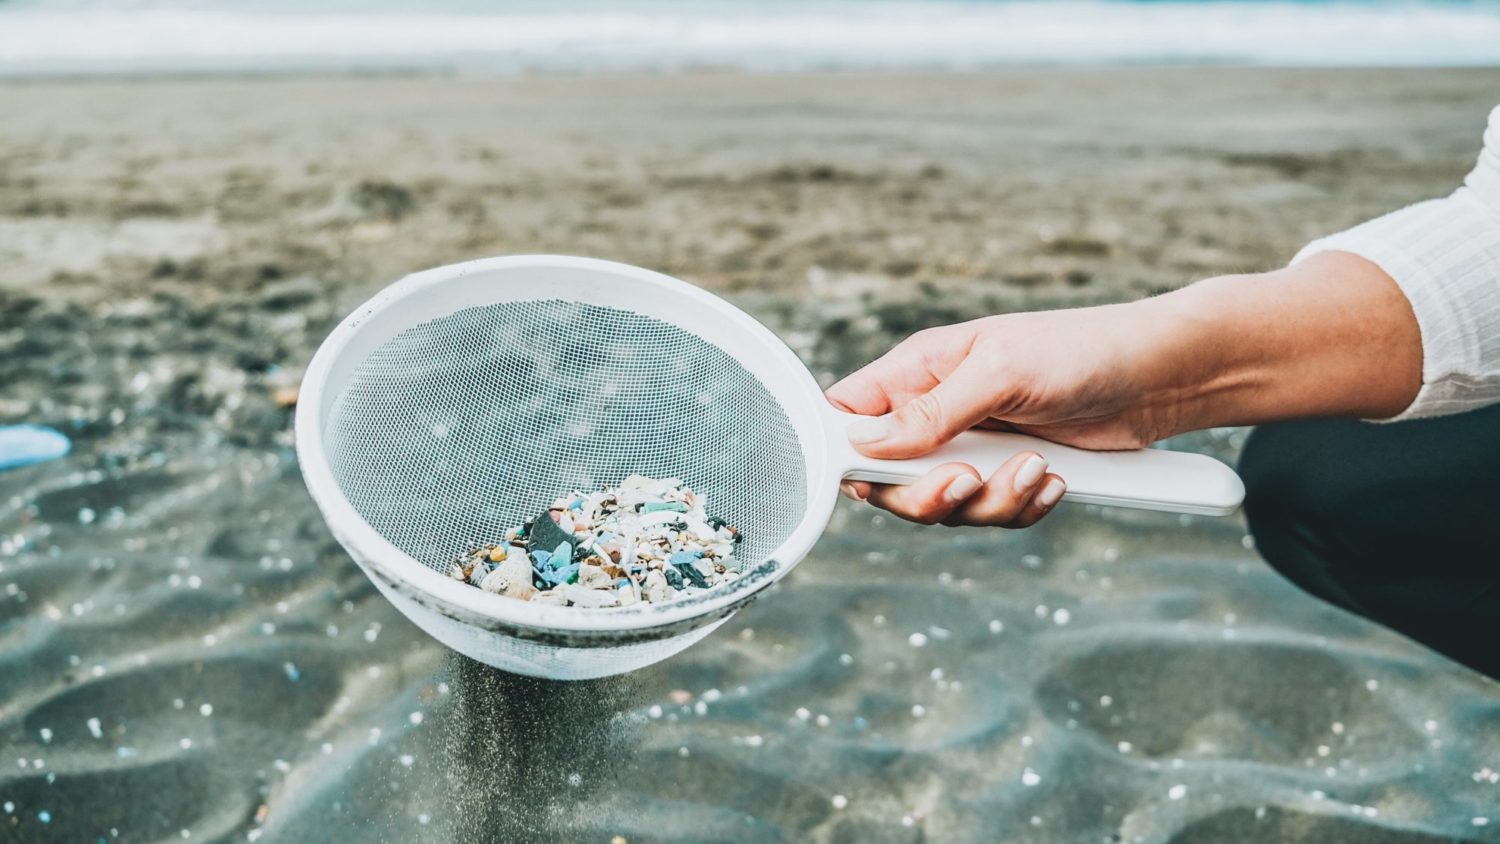 https://s41230.pcdn.co/wp-content/uploads/2021/03/what-are-microplastics-9-scaled.jpg